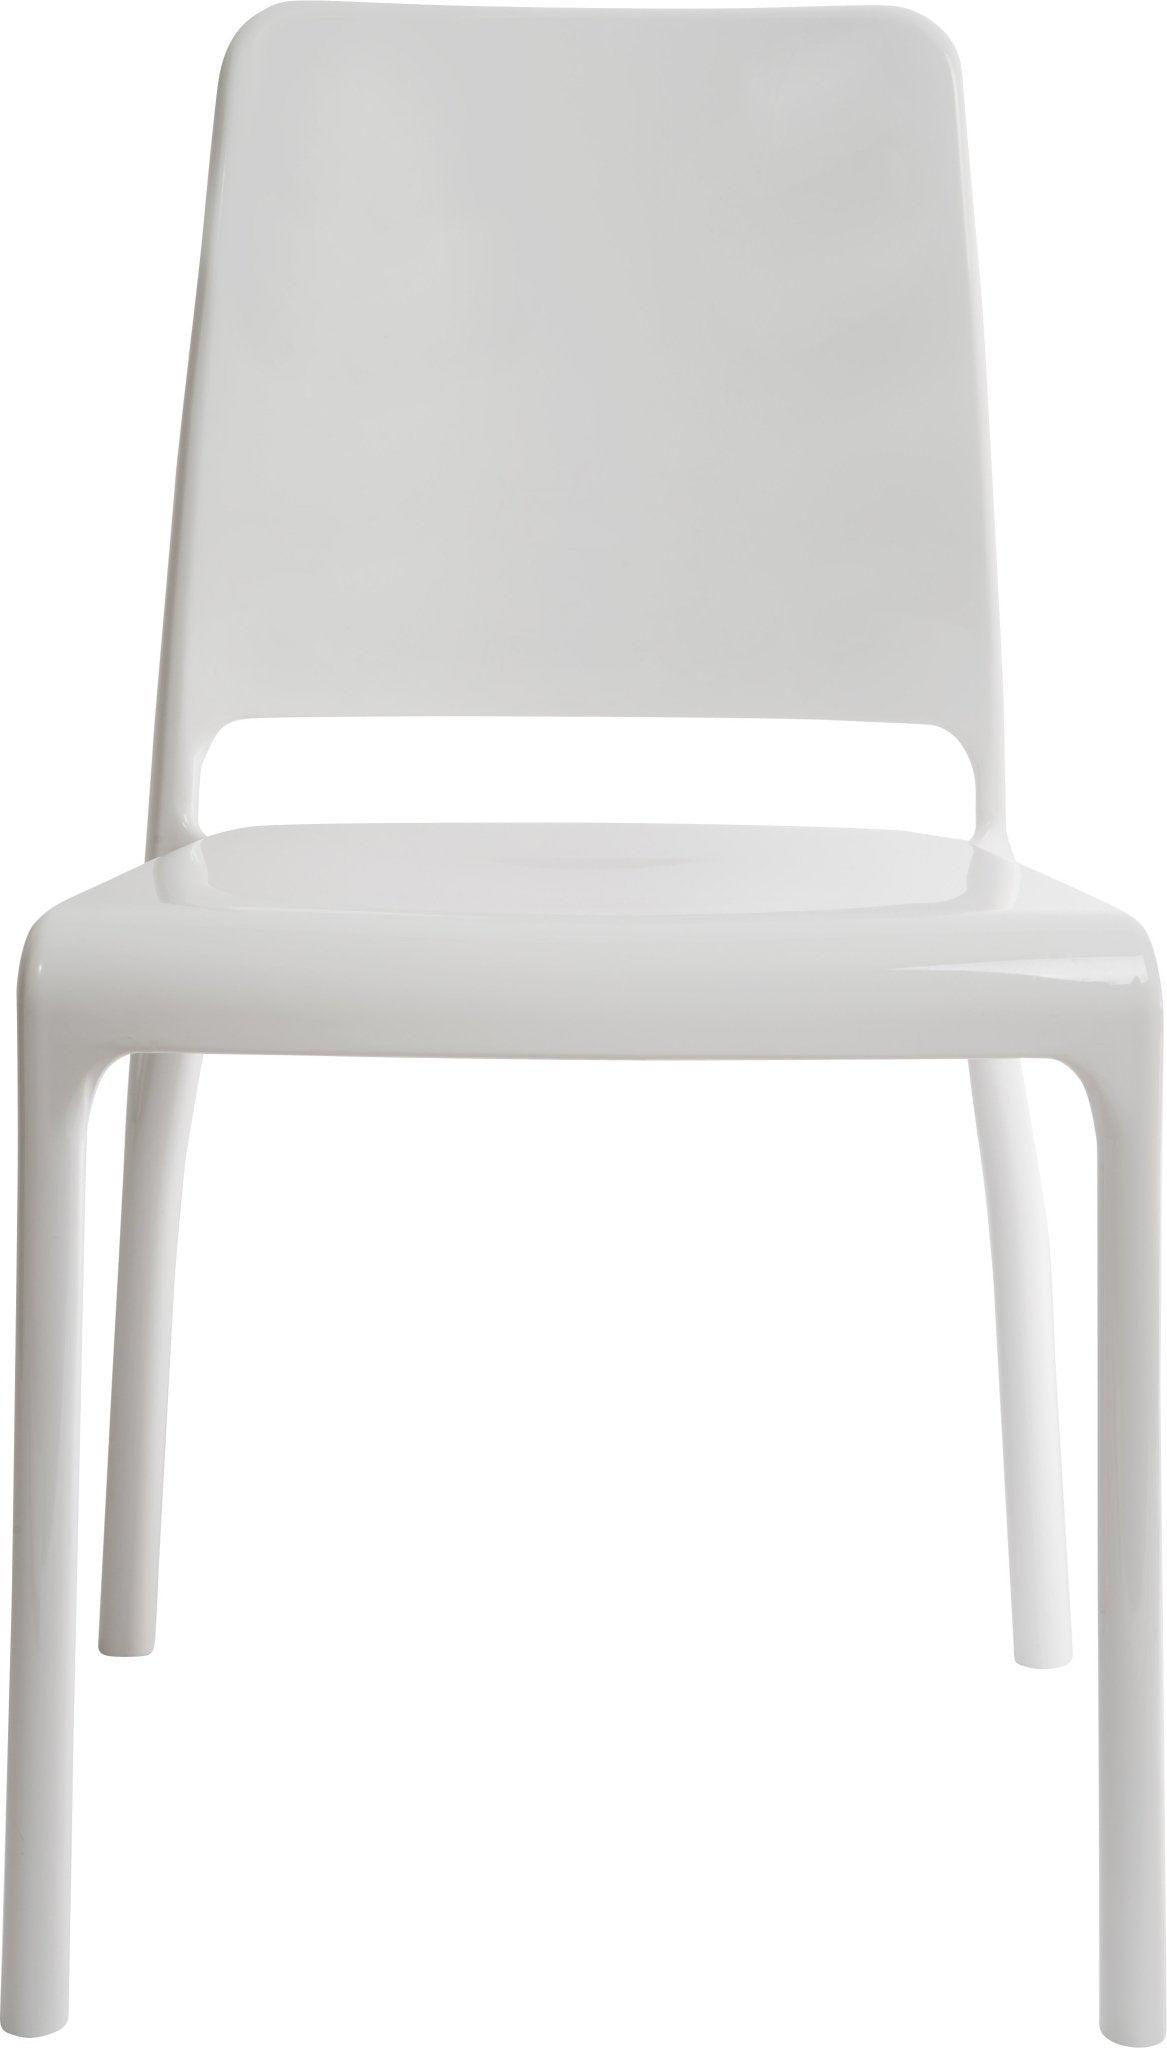 Clarity dining room chair (white) pack of 4 - crimblefest furniture - image 2